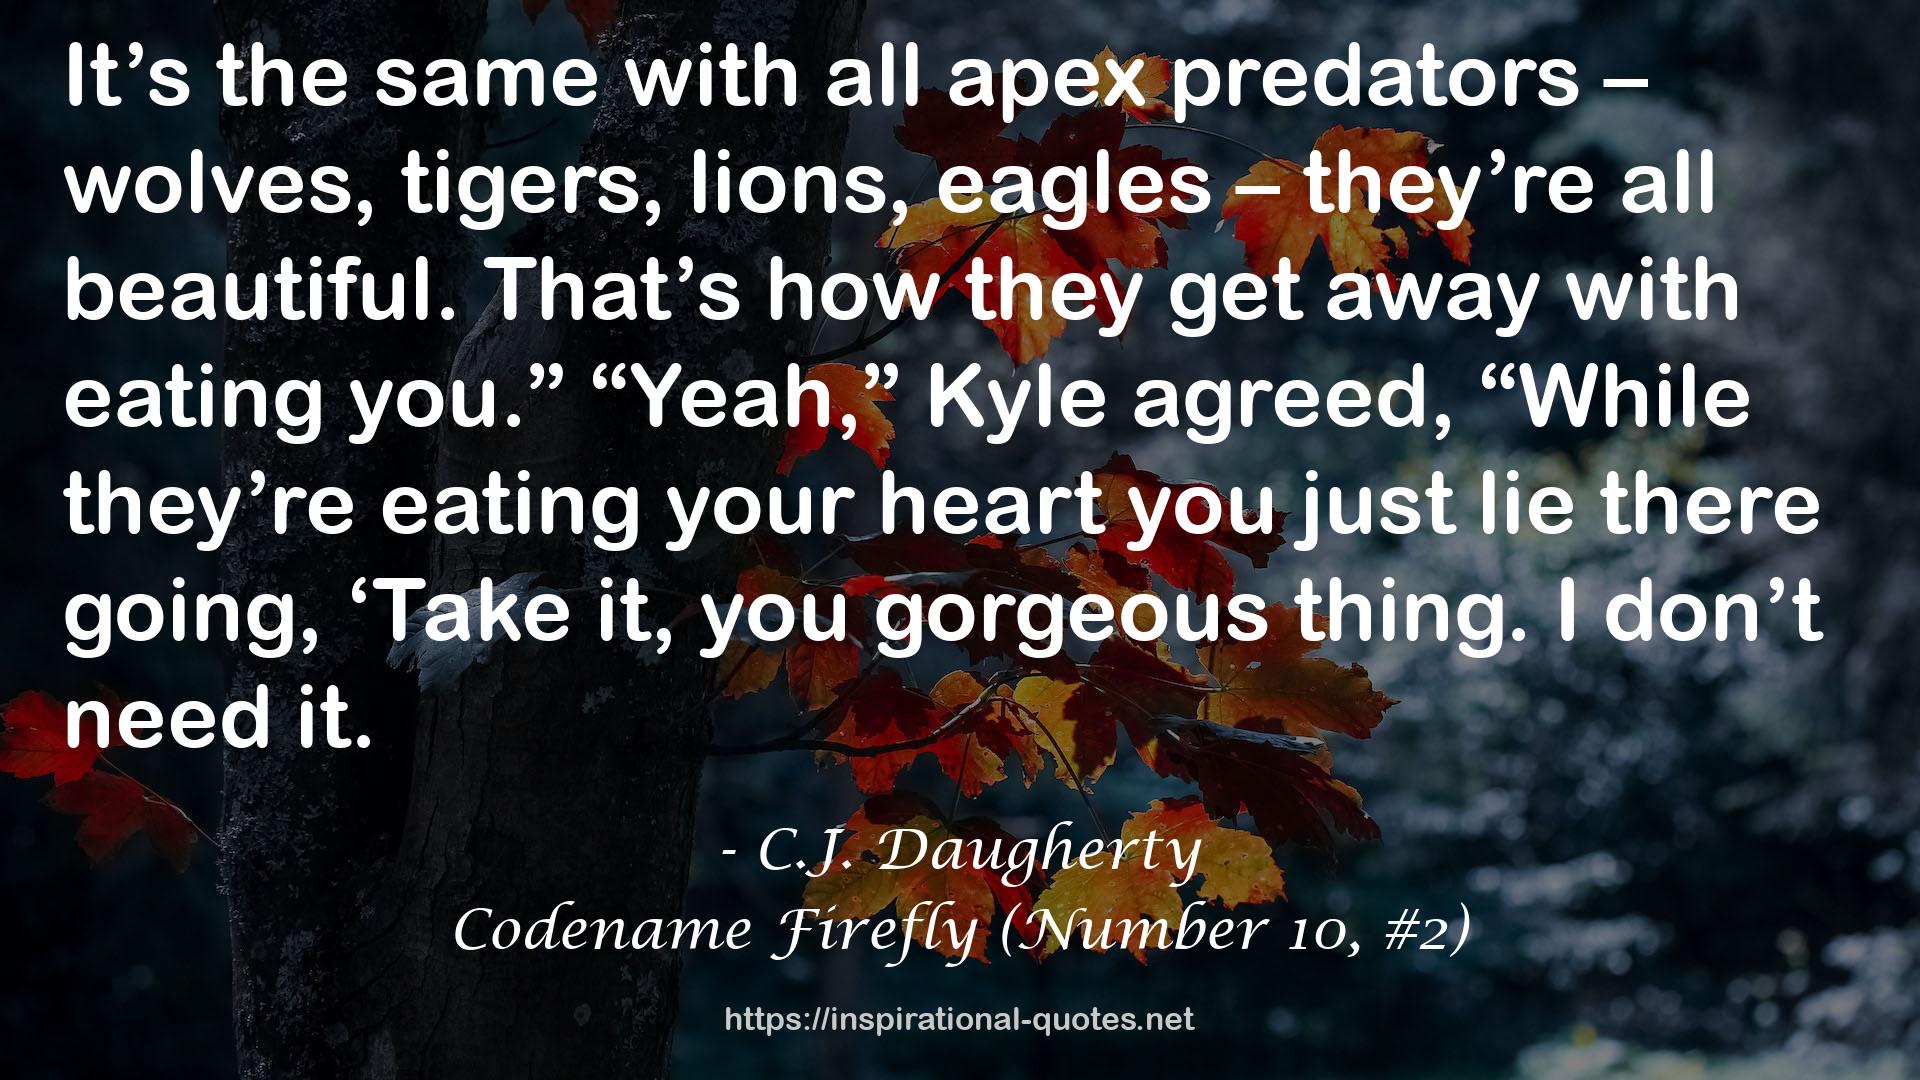 Codename Firefly (Number 10, #2) QUOTES